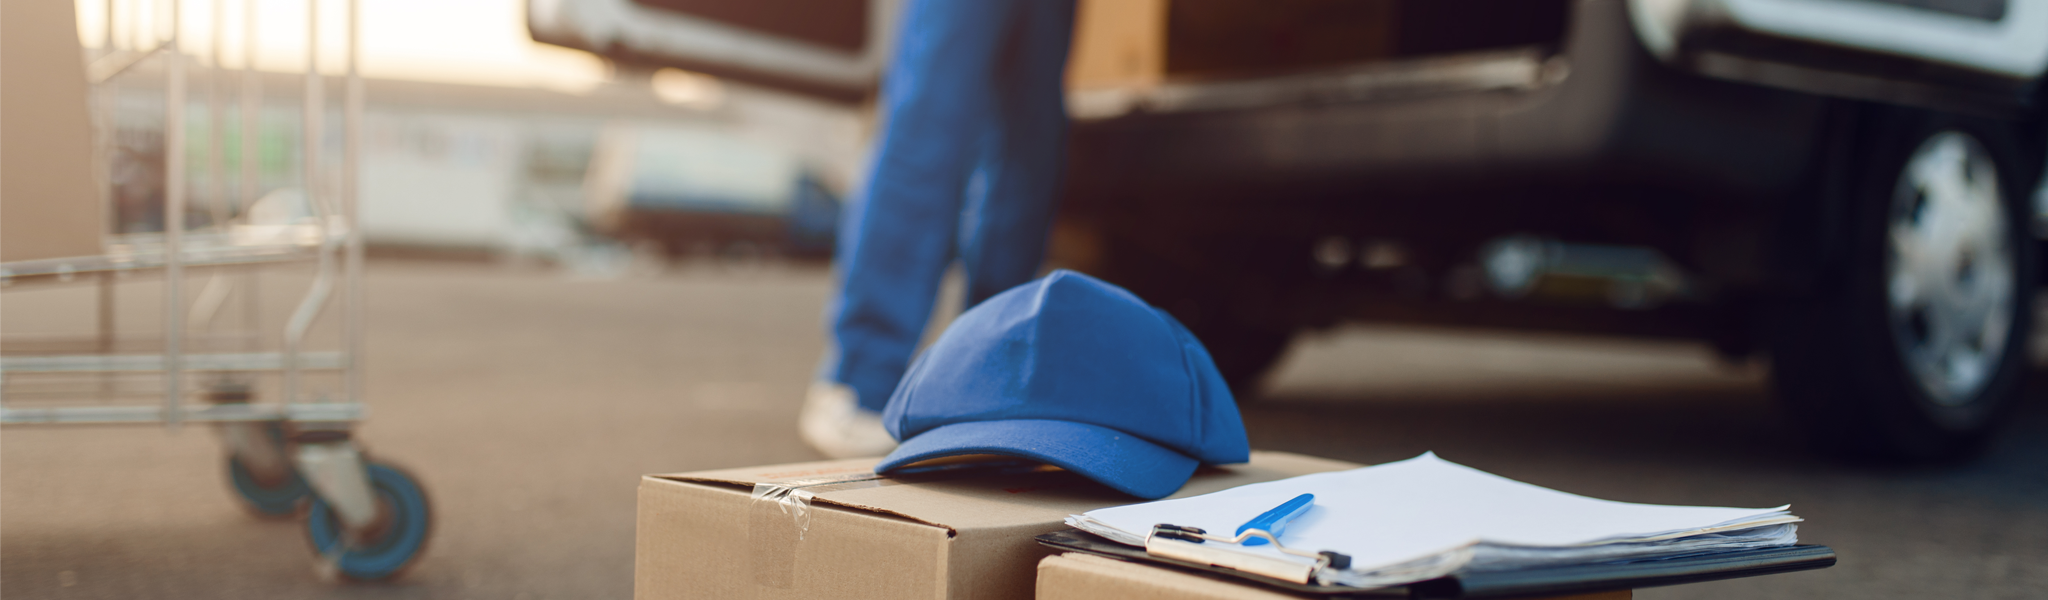 parcel-boxes-and-cap-deliveryman-on-background-78W2Z7K.png?1632235780825